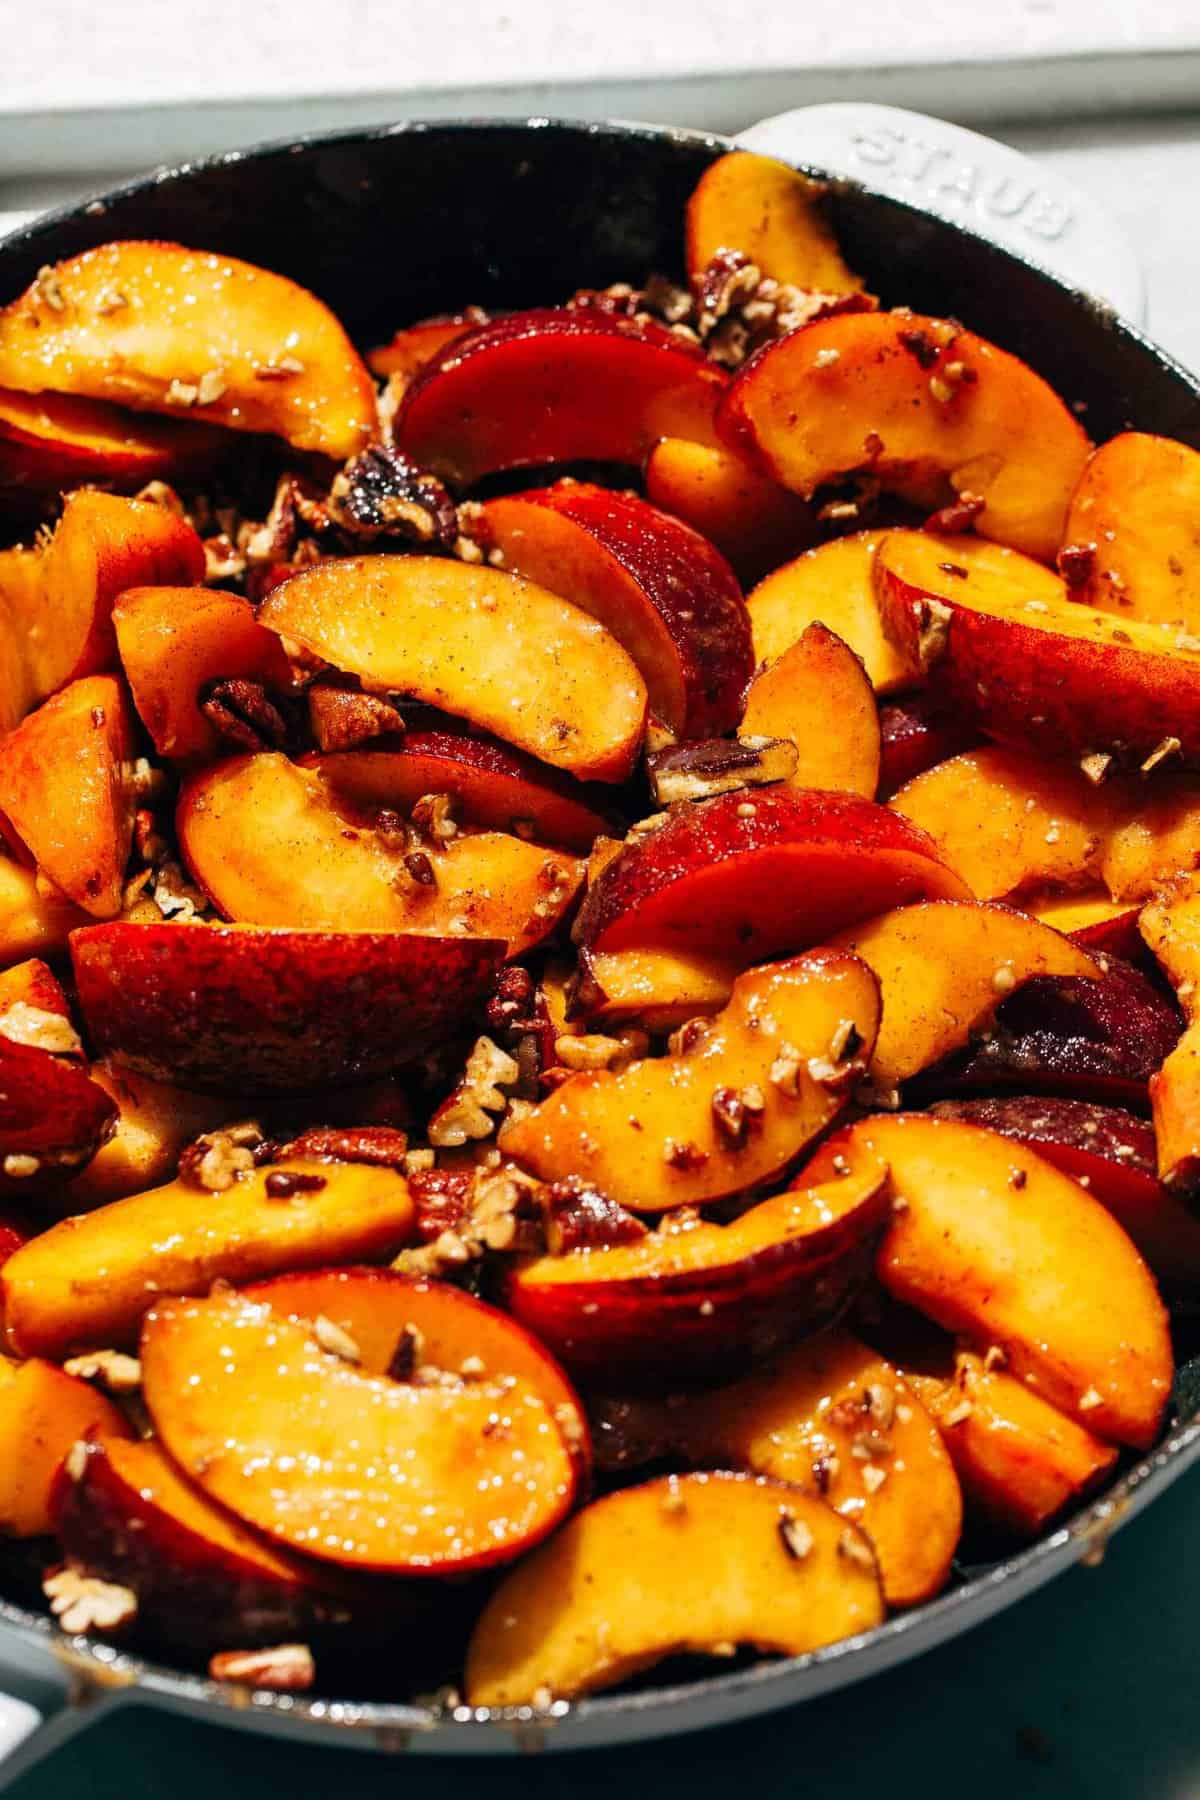 sliced peaches tossed in sugar and toasted peaches and spread in a cast iron skillet